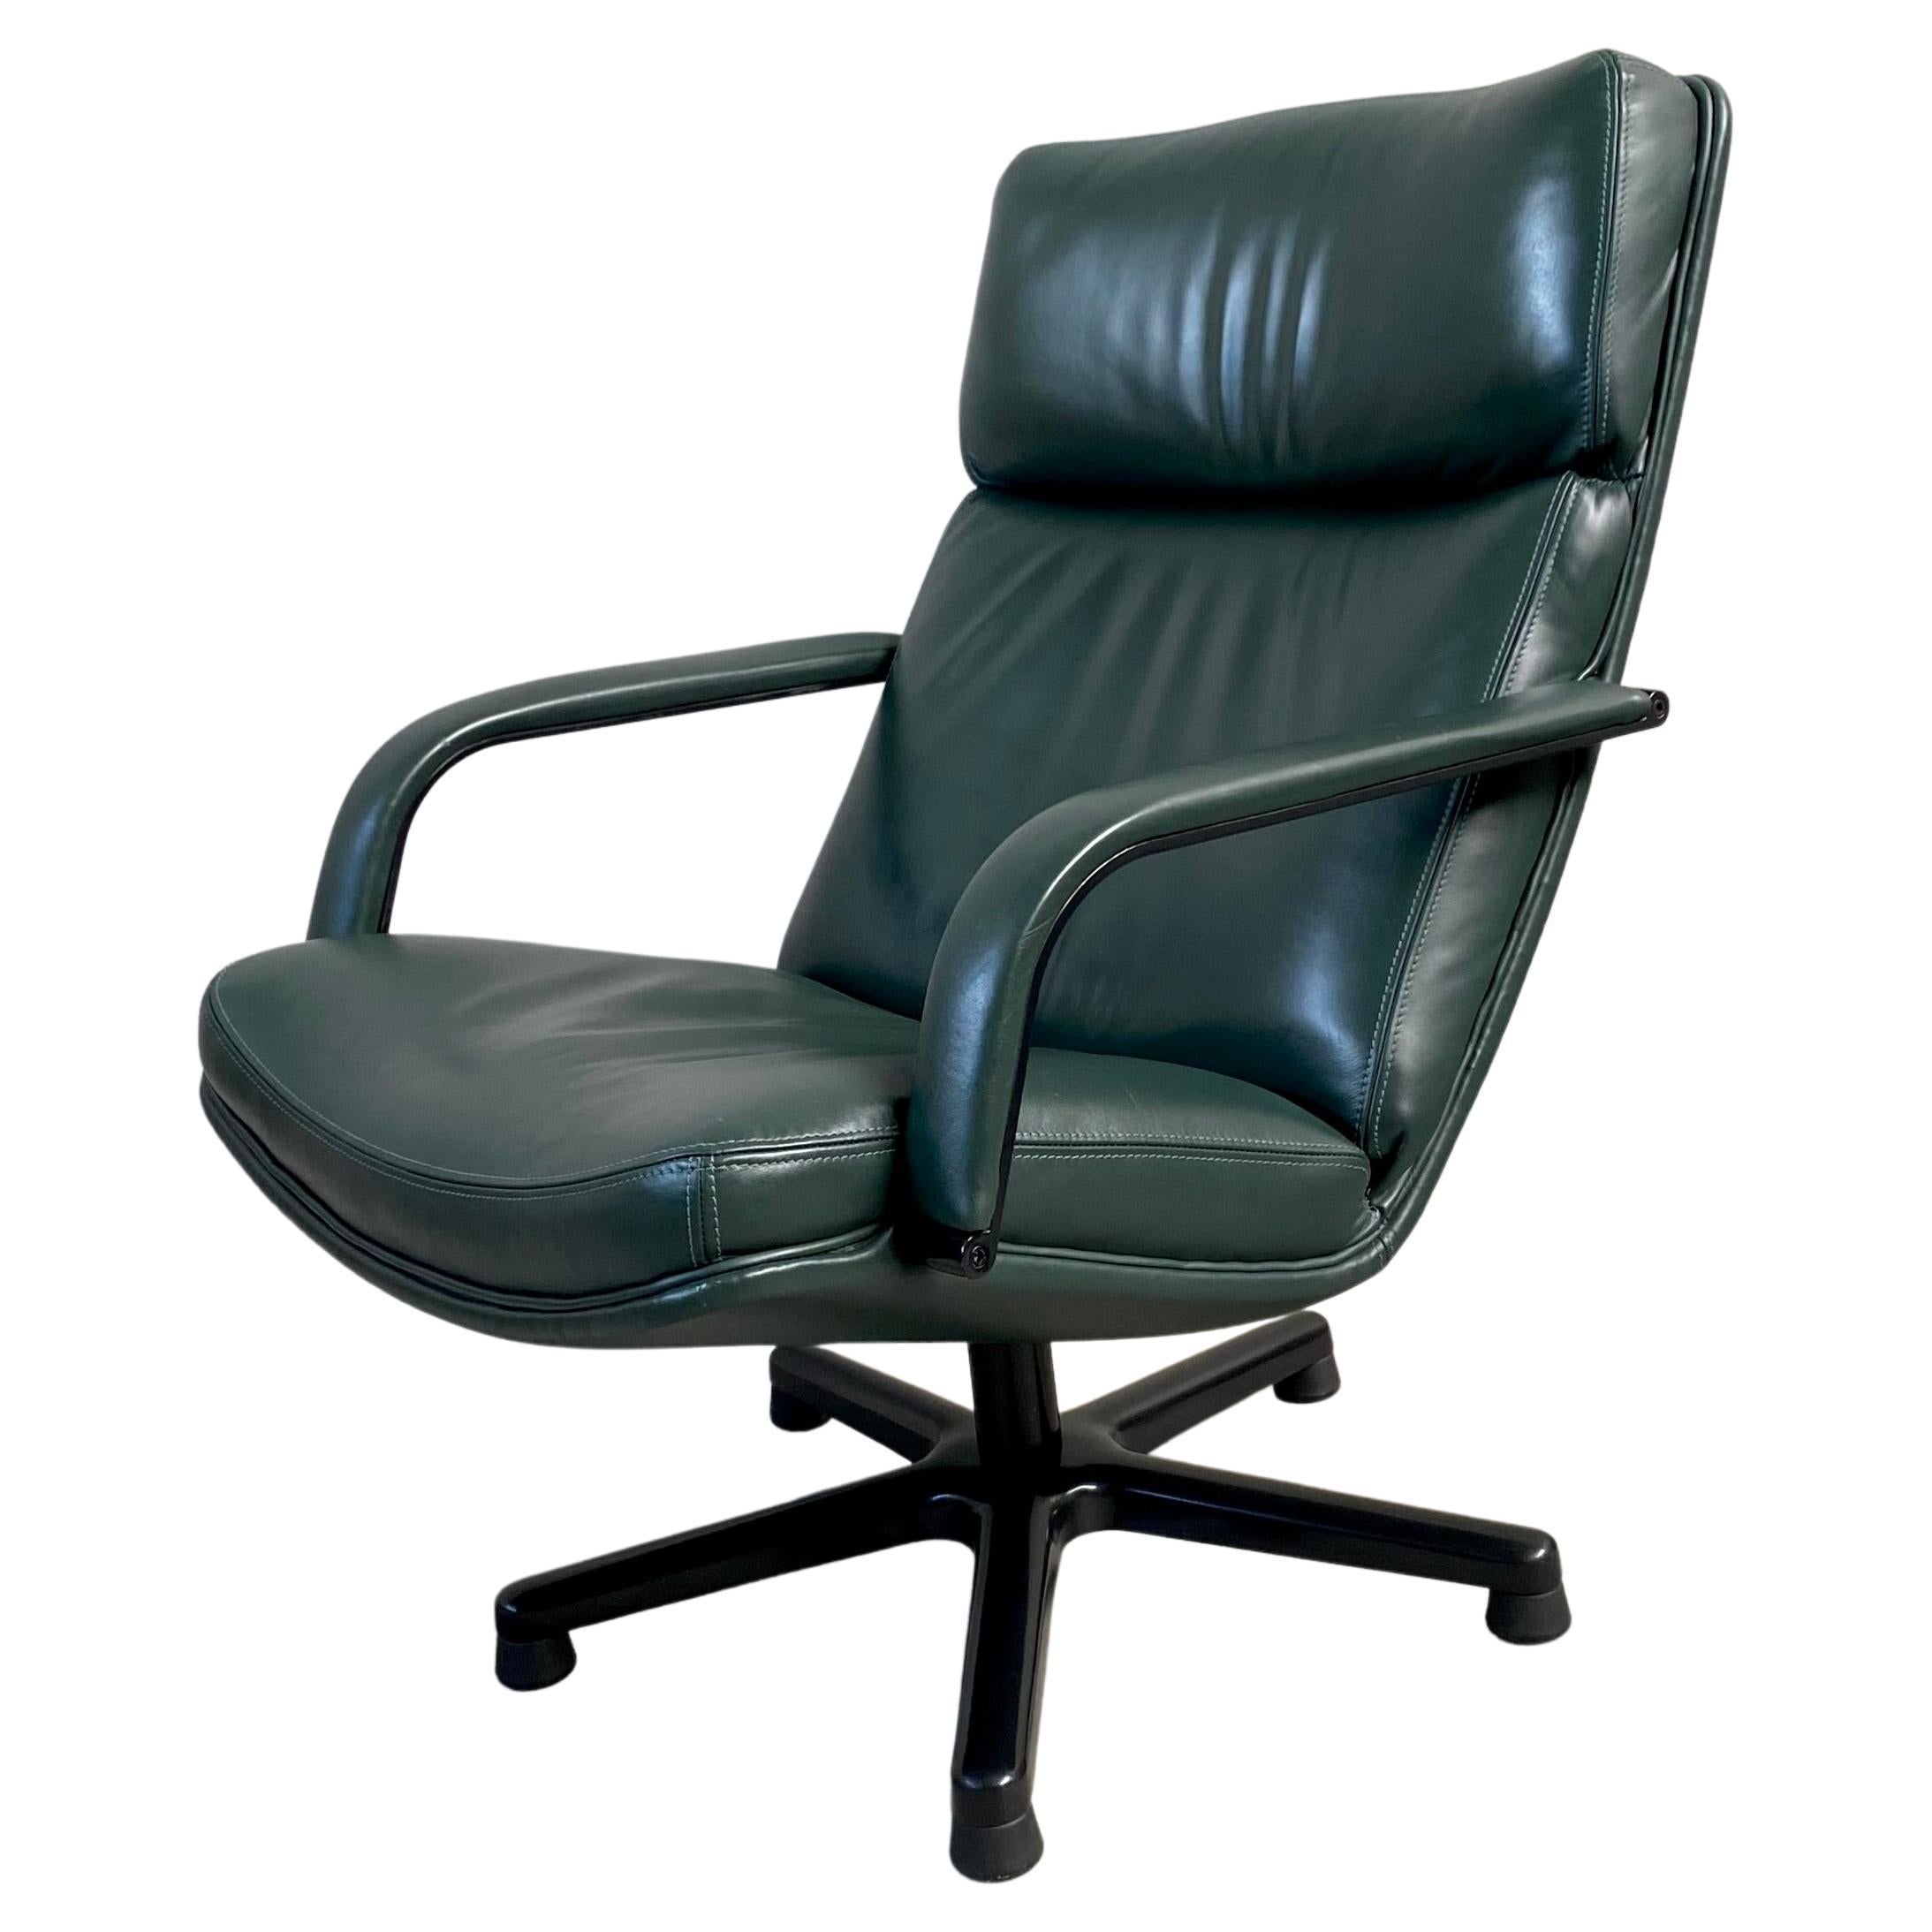 Forrest Green Leather "F141" lounge Chair by Geoffrey Harcourt for Artifort 1978